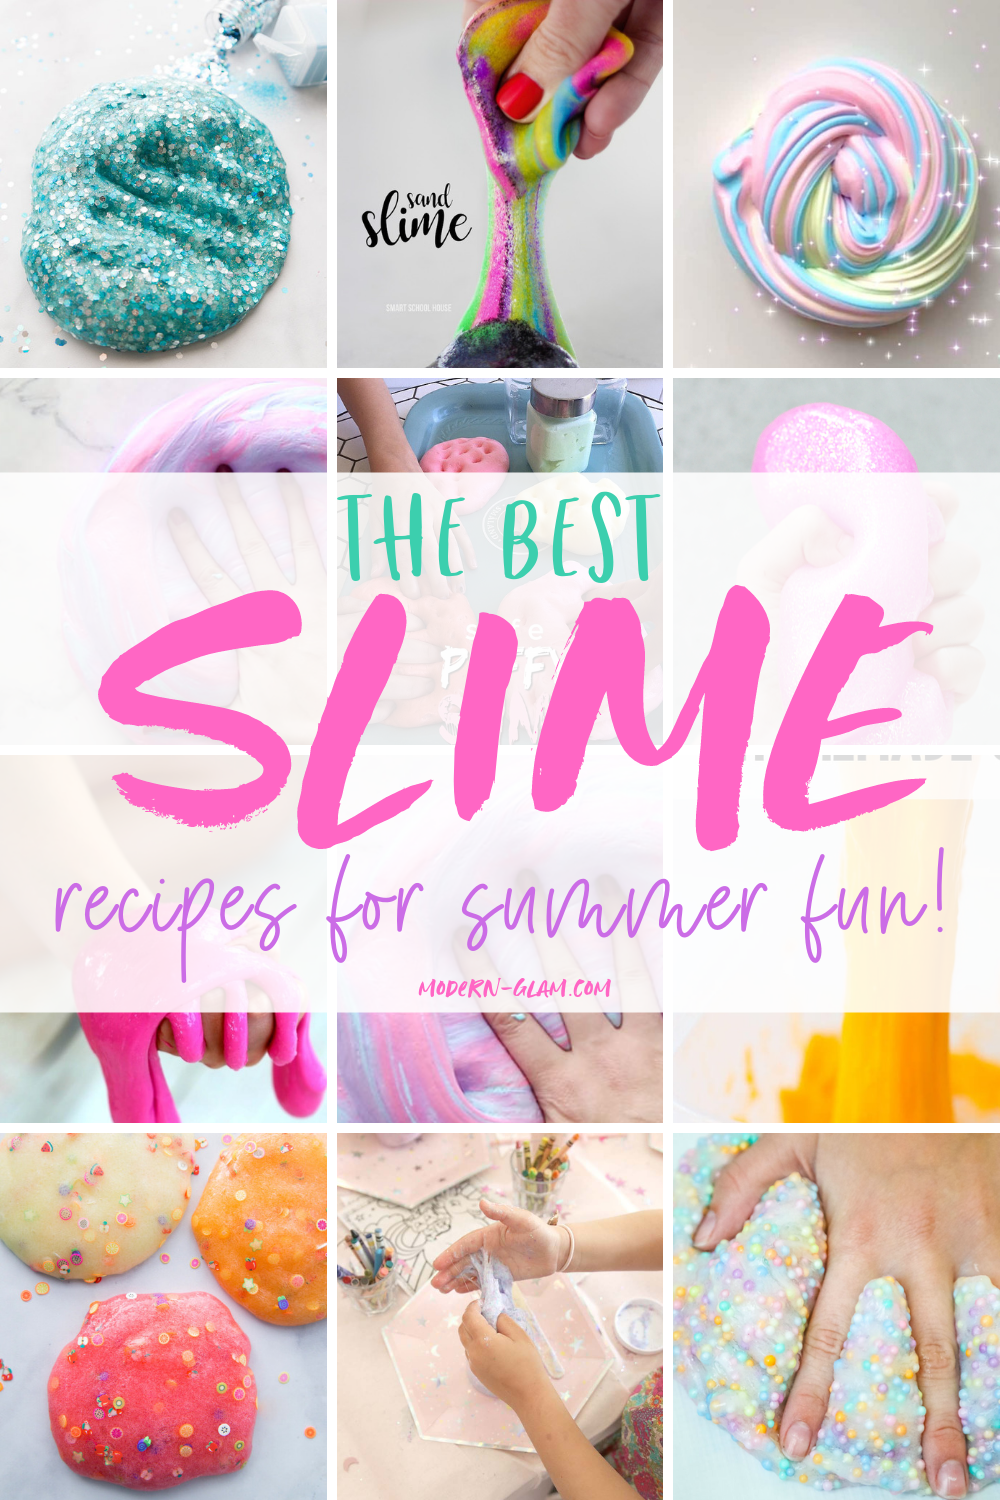 How To Make Slime: 4 Best Slime Recipes